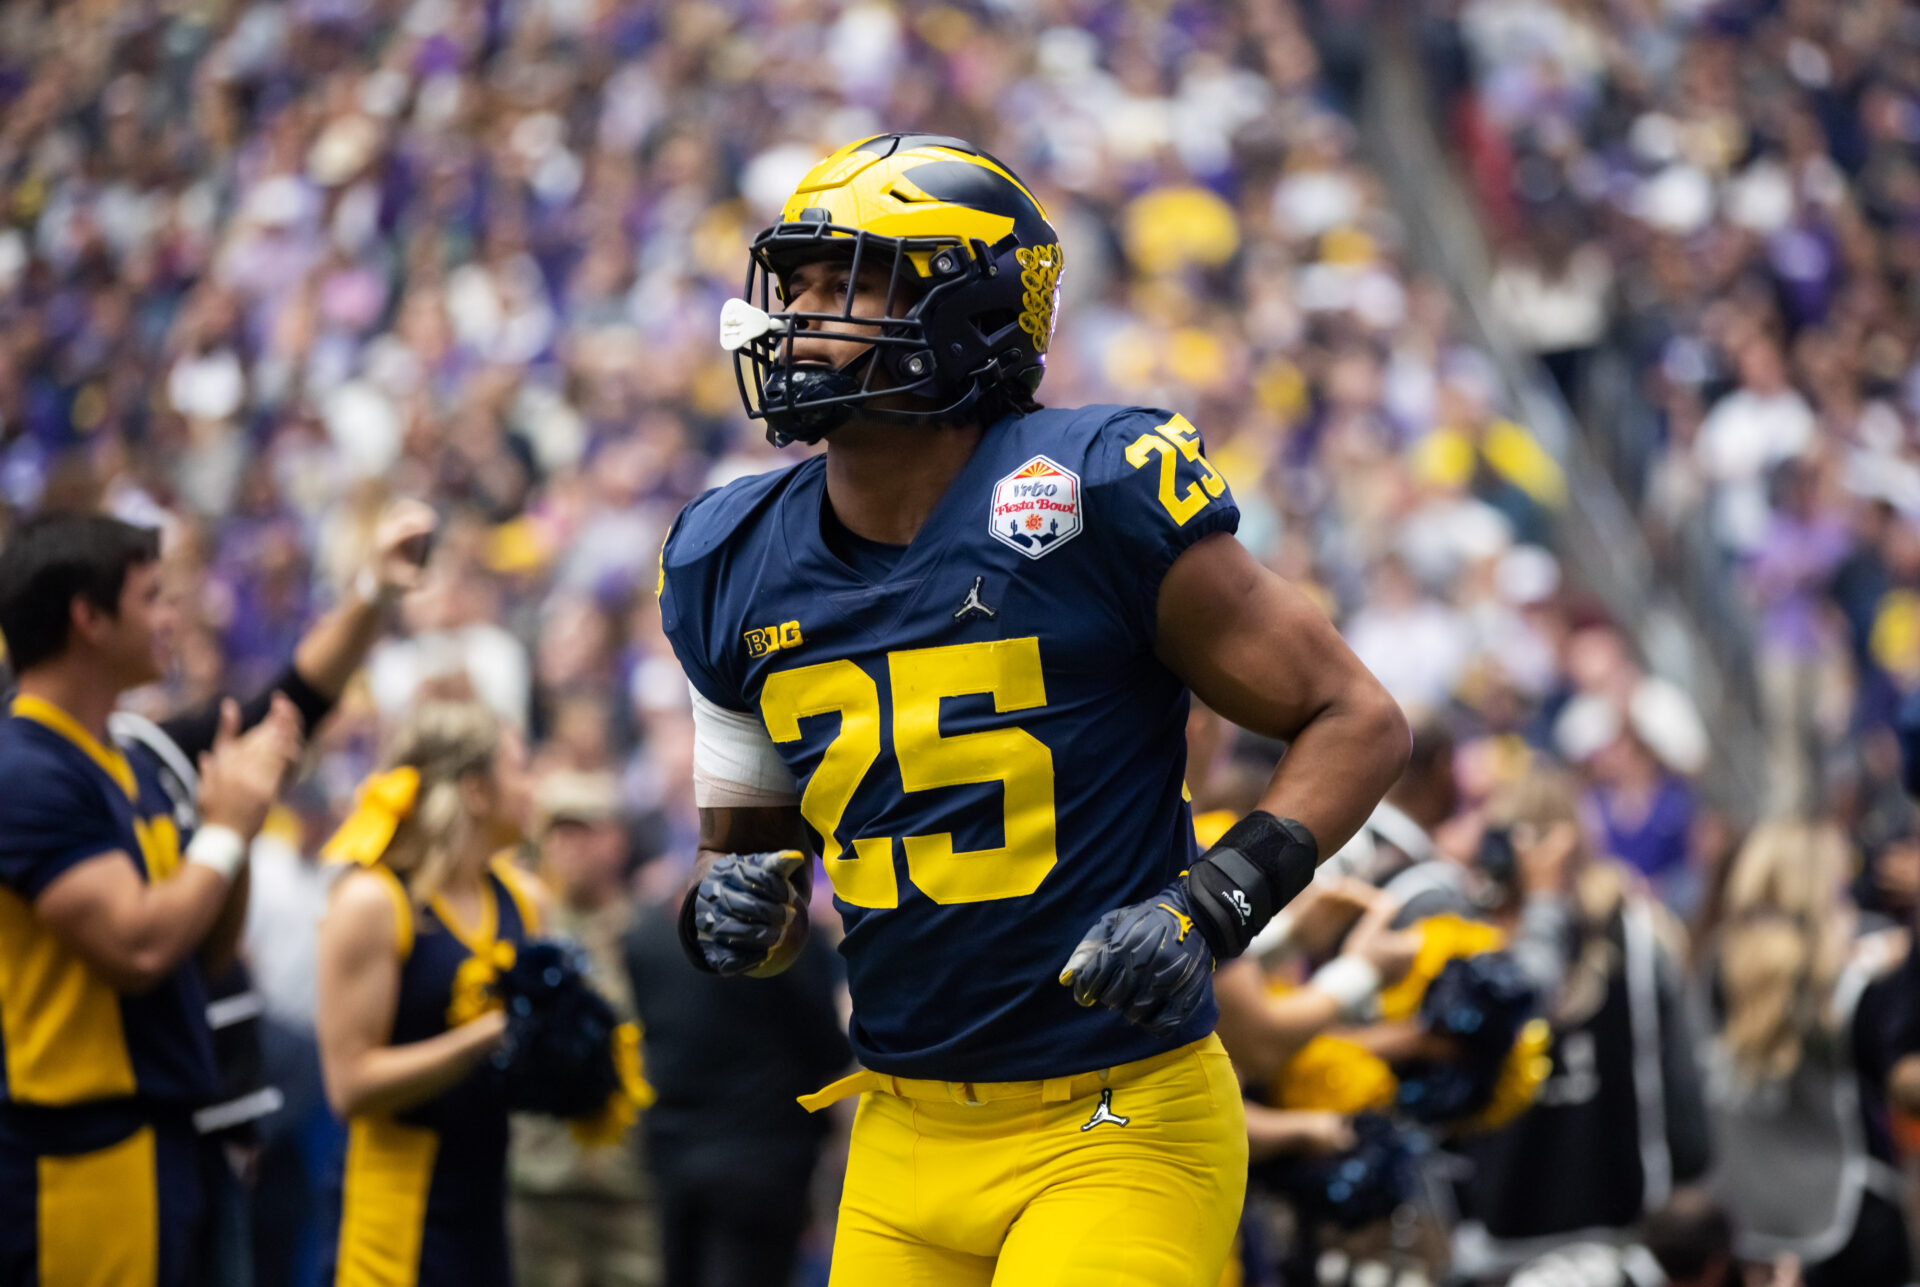 Michigan Wolverines linebacker Junior Colson (25) against the TCU Horned Frogs during the 2022 Fiesta Bowl at State Farm Stadium.